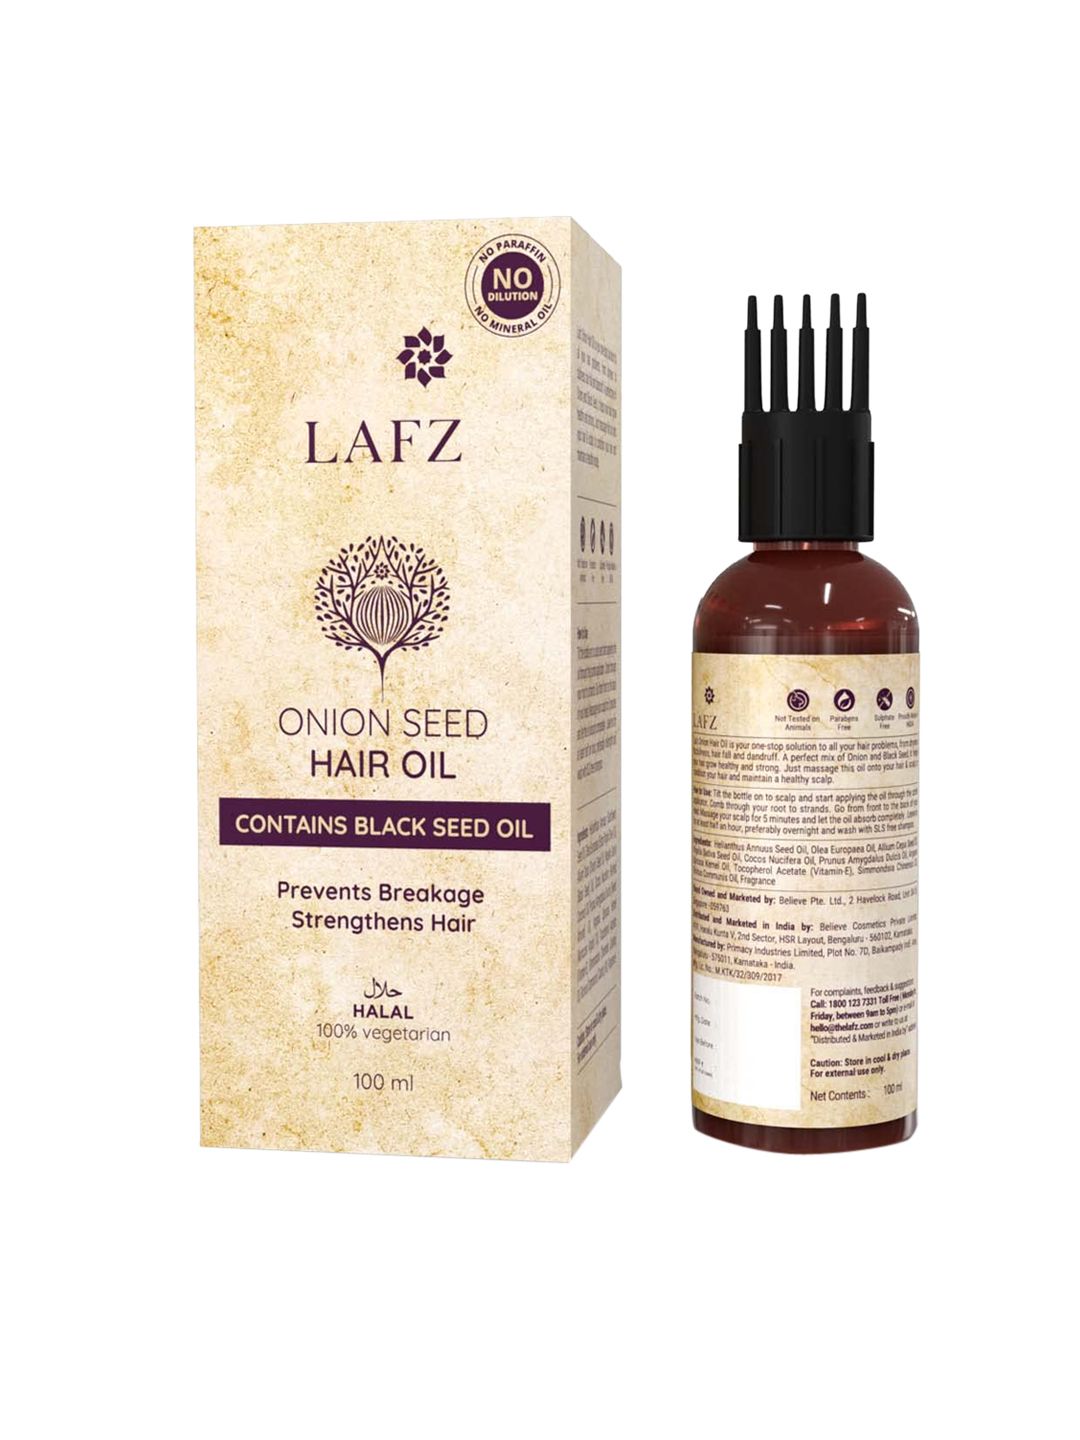 LAFZ Unisex Onion Seed Hair Oil 100 ml Price in India